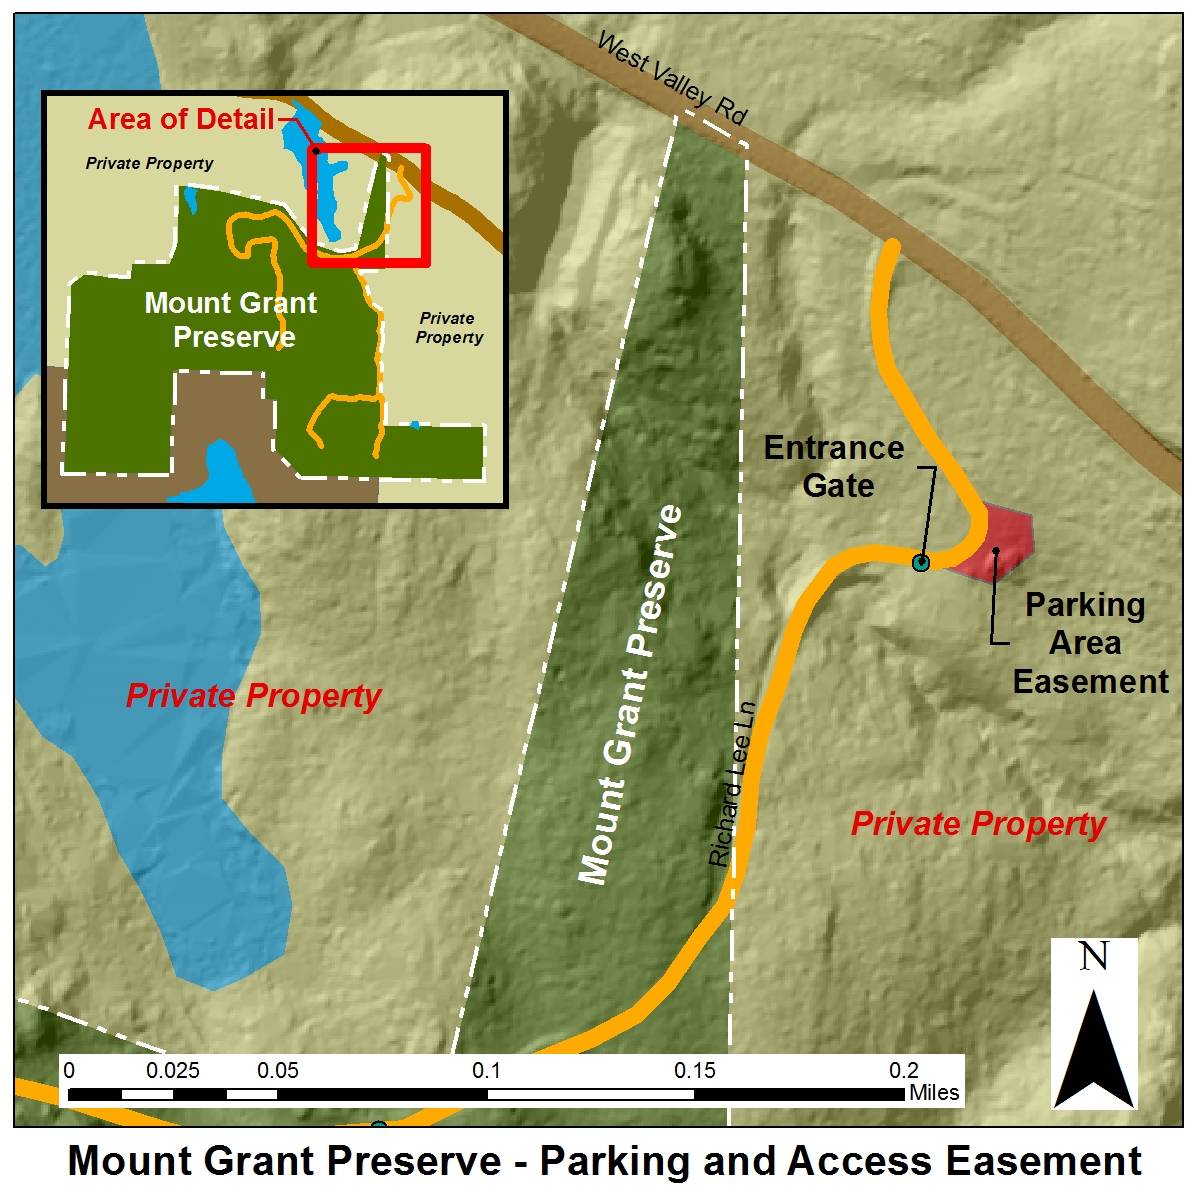 Reminder: Access to Mount Grant is through a private road